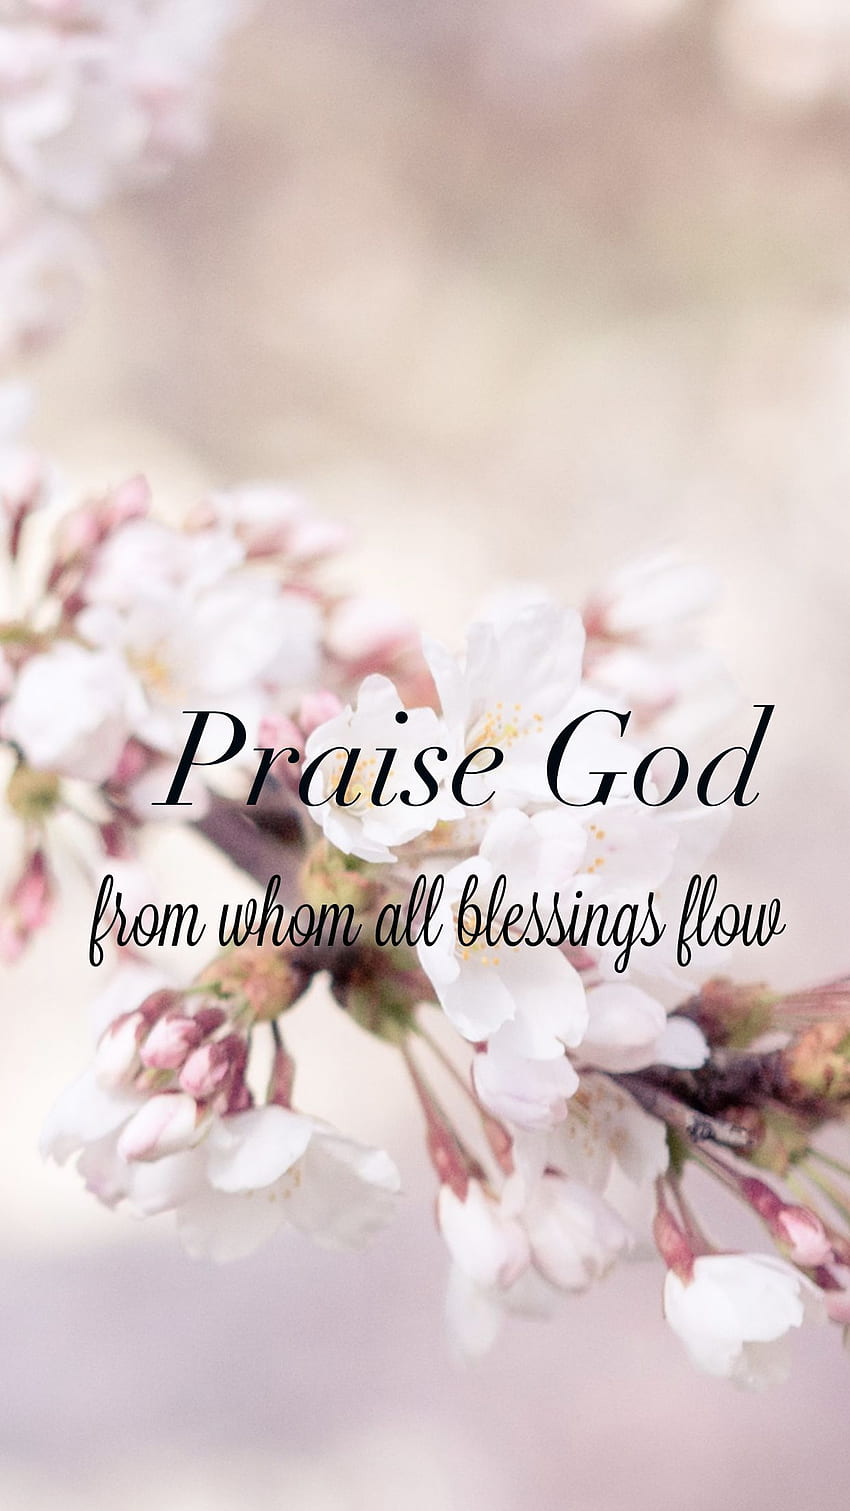 Phone . Praise quotes, Quotes about god, Praise god, Bible Quote ...